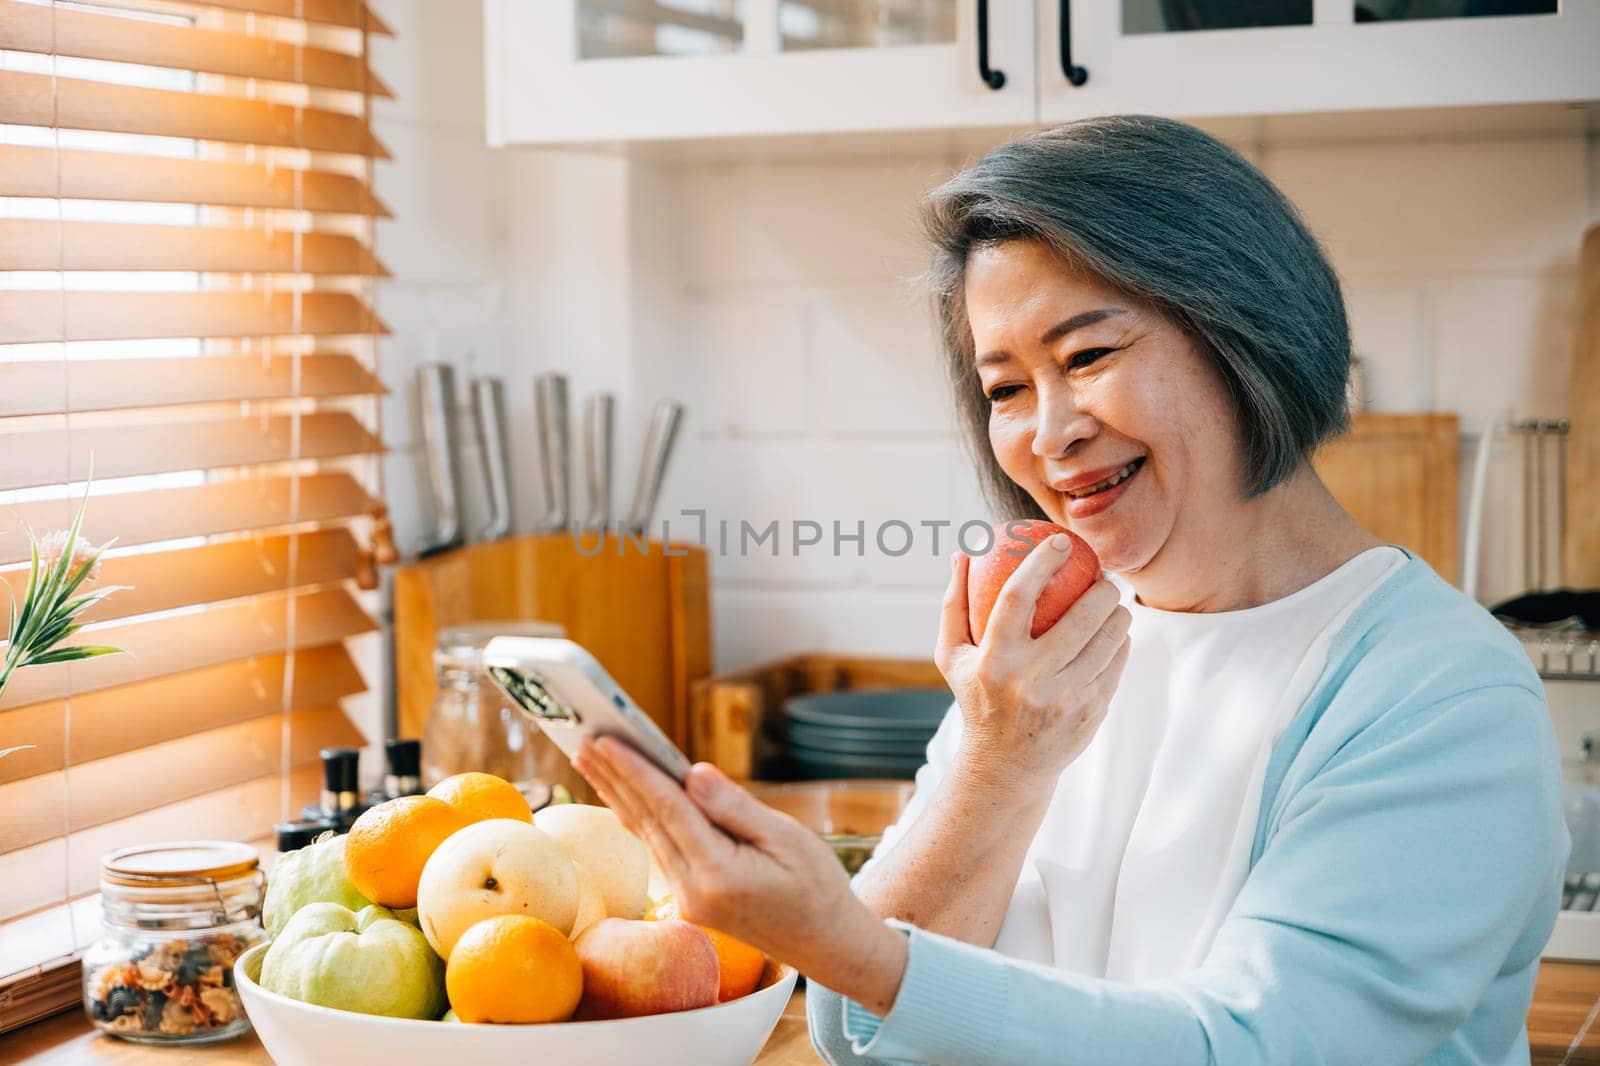 An old Asian woman, a grandmother, enjoys breakfast in the kitchen. She smiles while using her smartphone at home, eating a red apple. A portrait of modern technology and happiness.